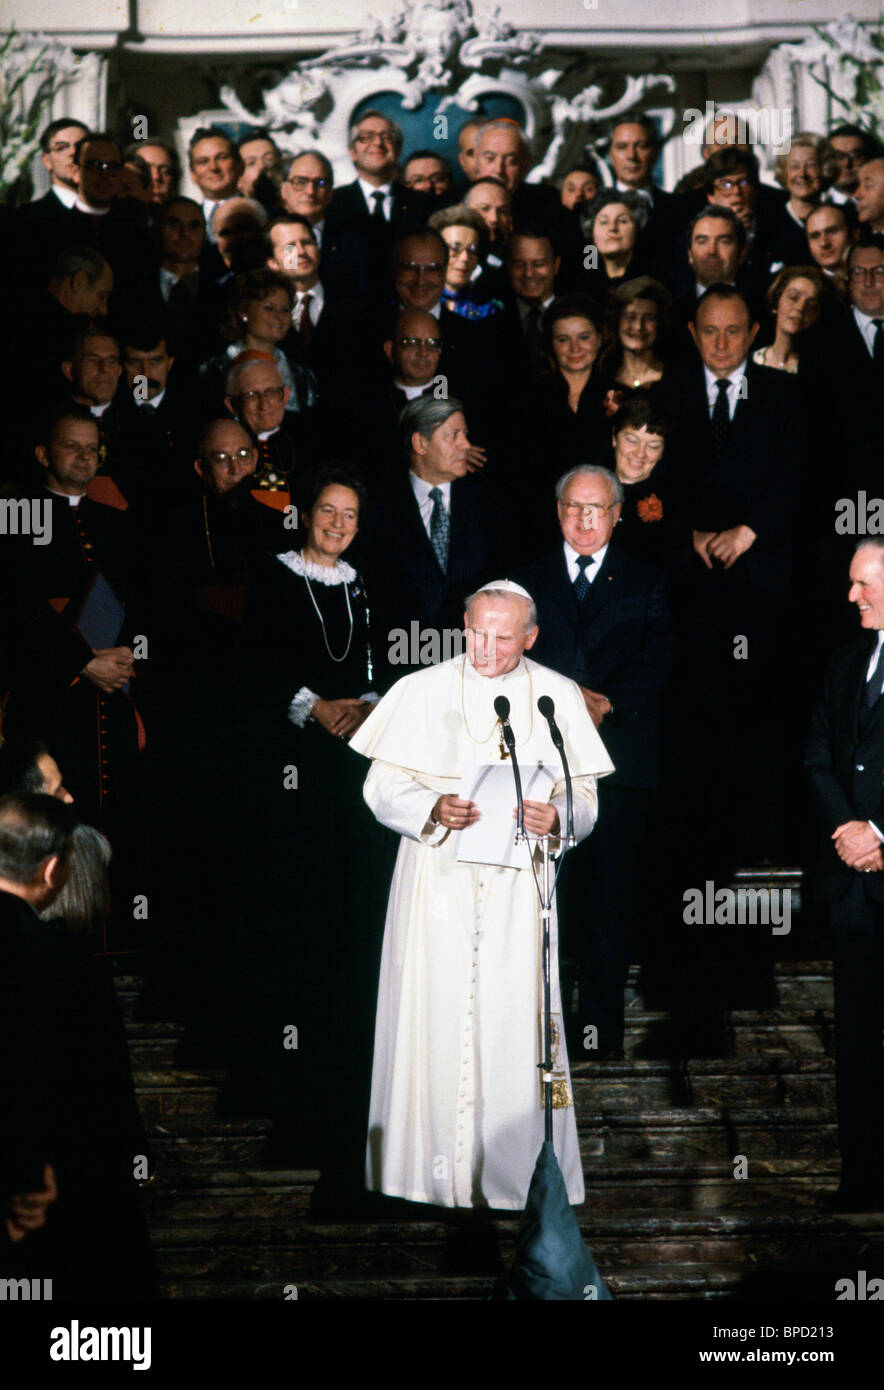 Pope John Paul II, with Chancellor Helmut Schmidt behind, making a speech during his visit to Germany Stock Photo